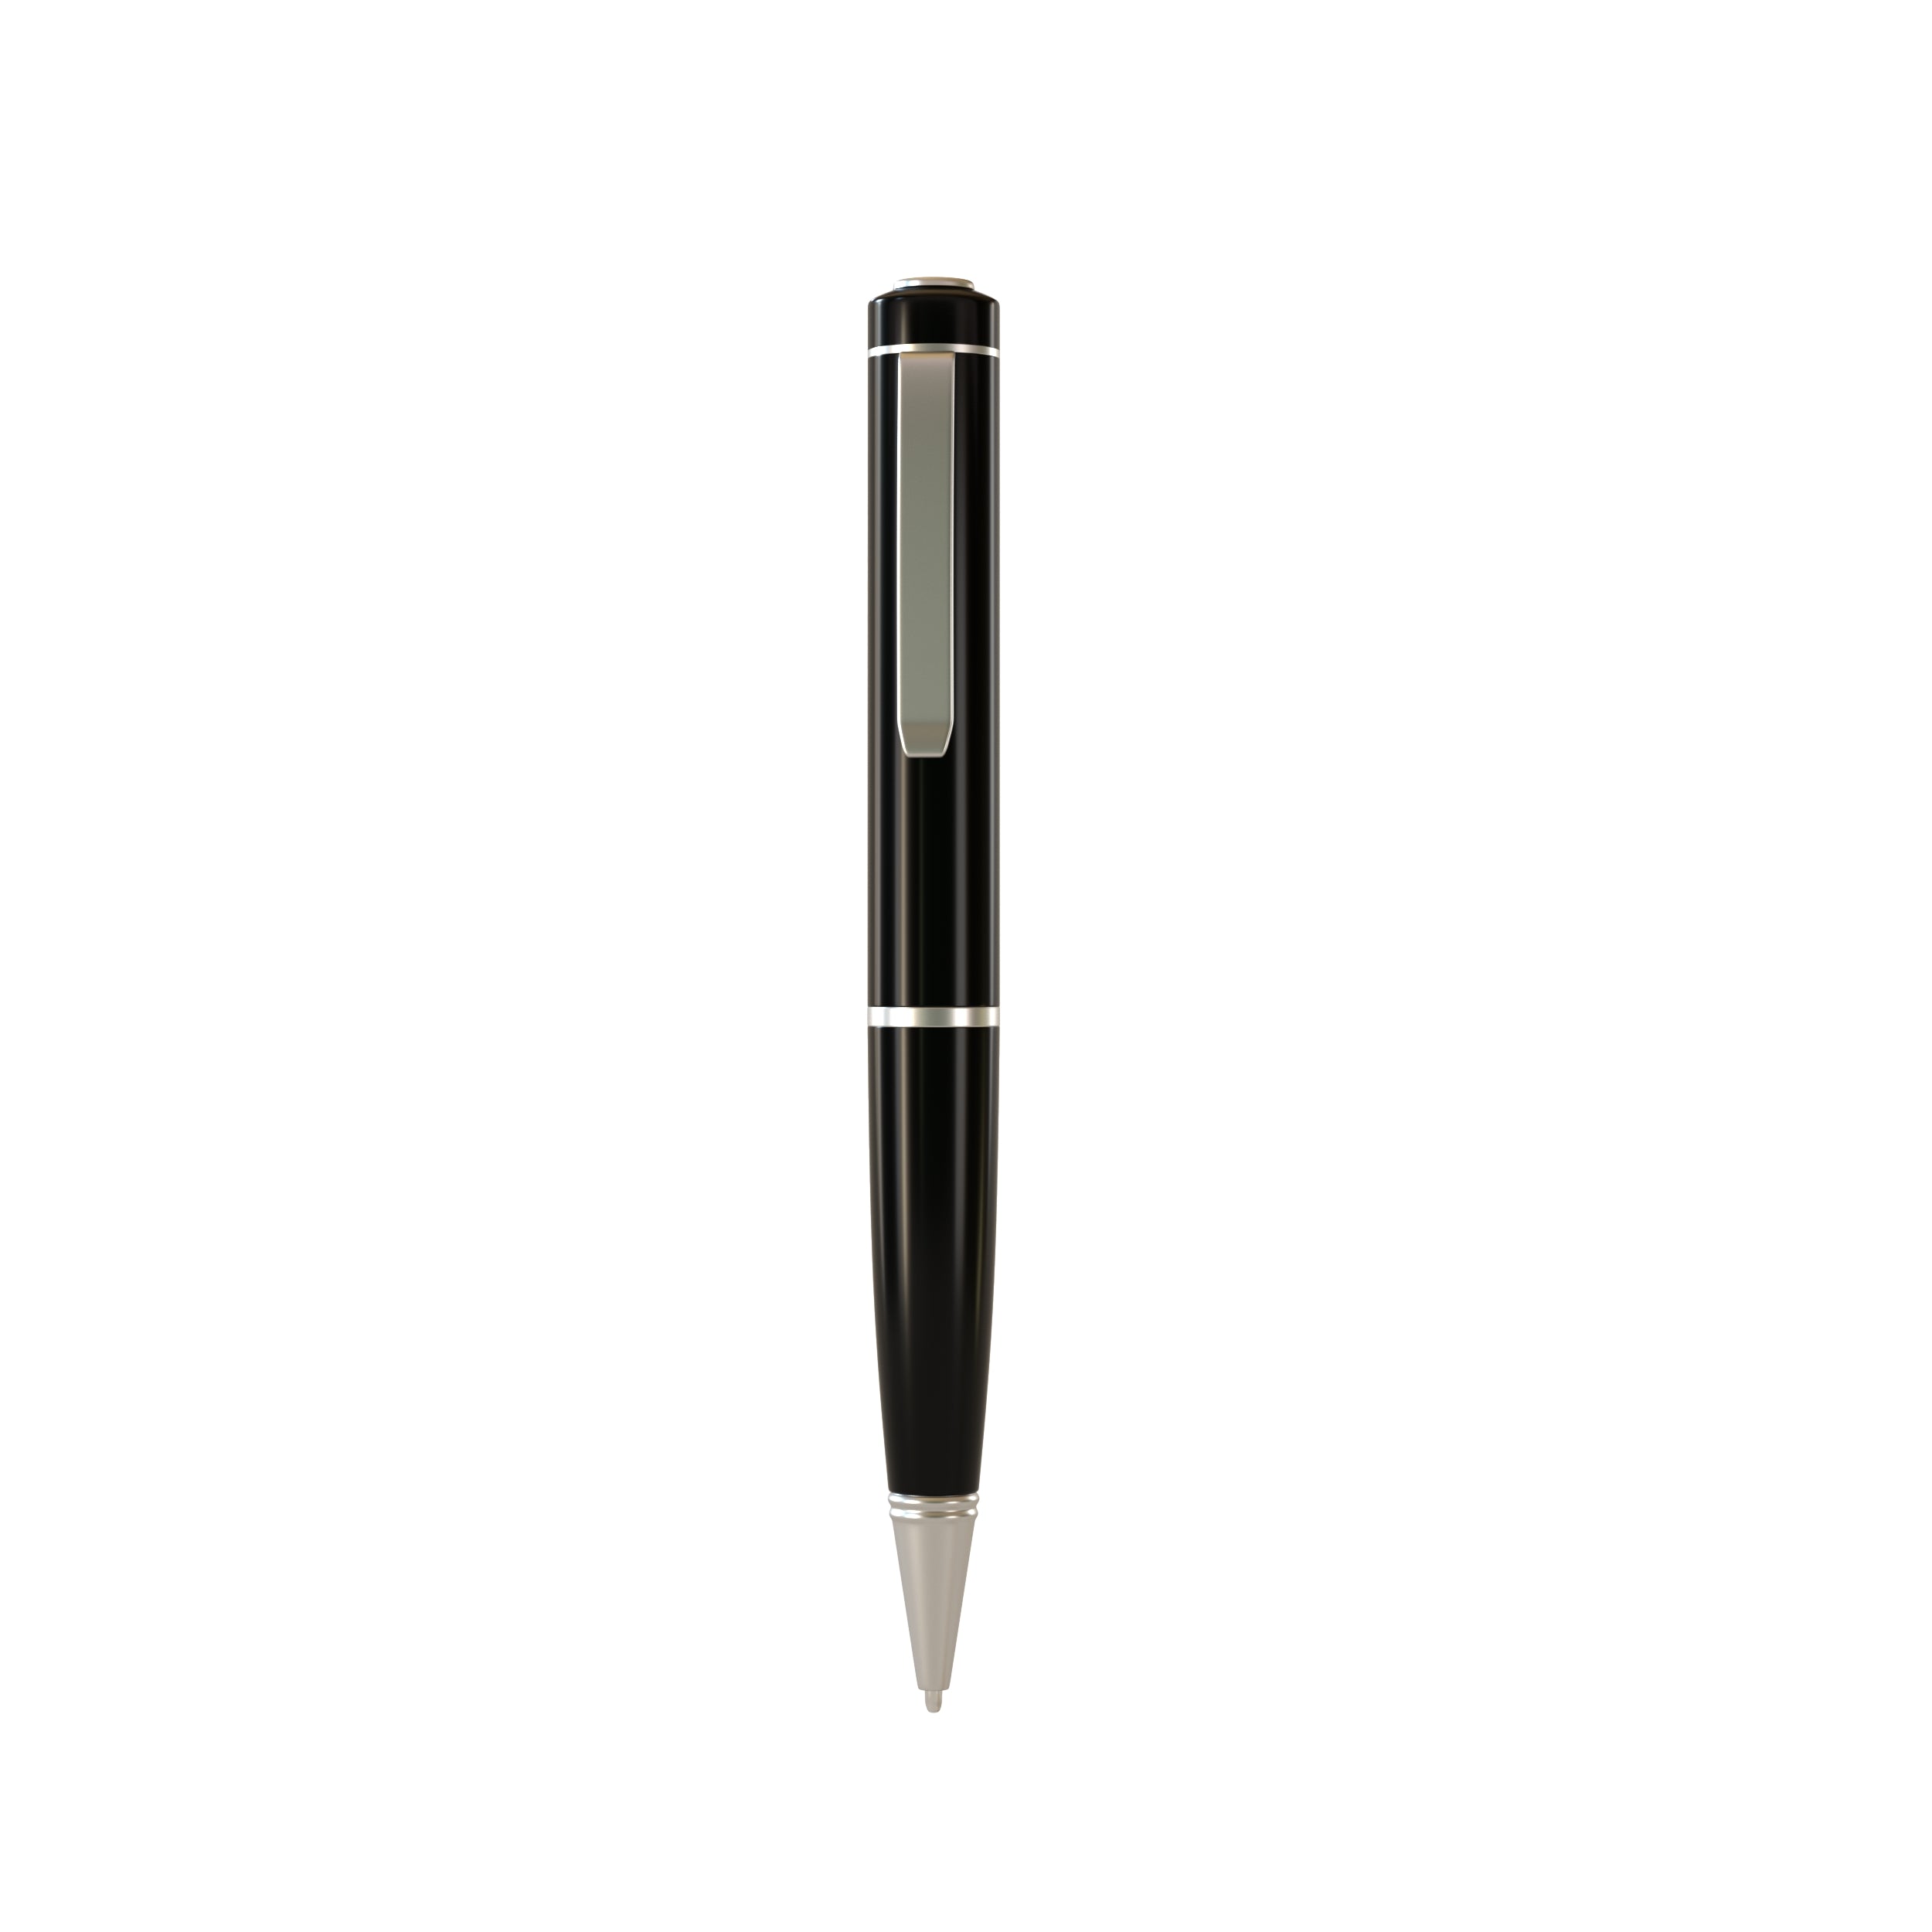 25 Hour Voice Activated Recorder Pen